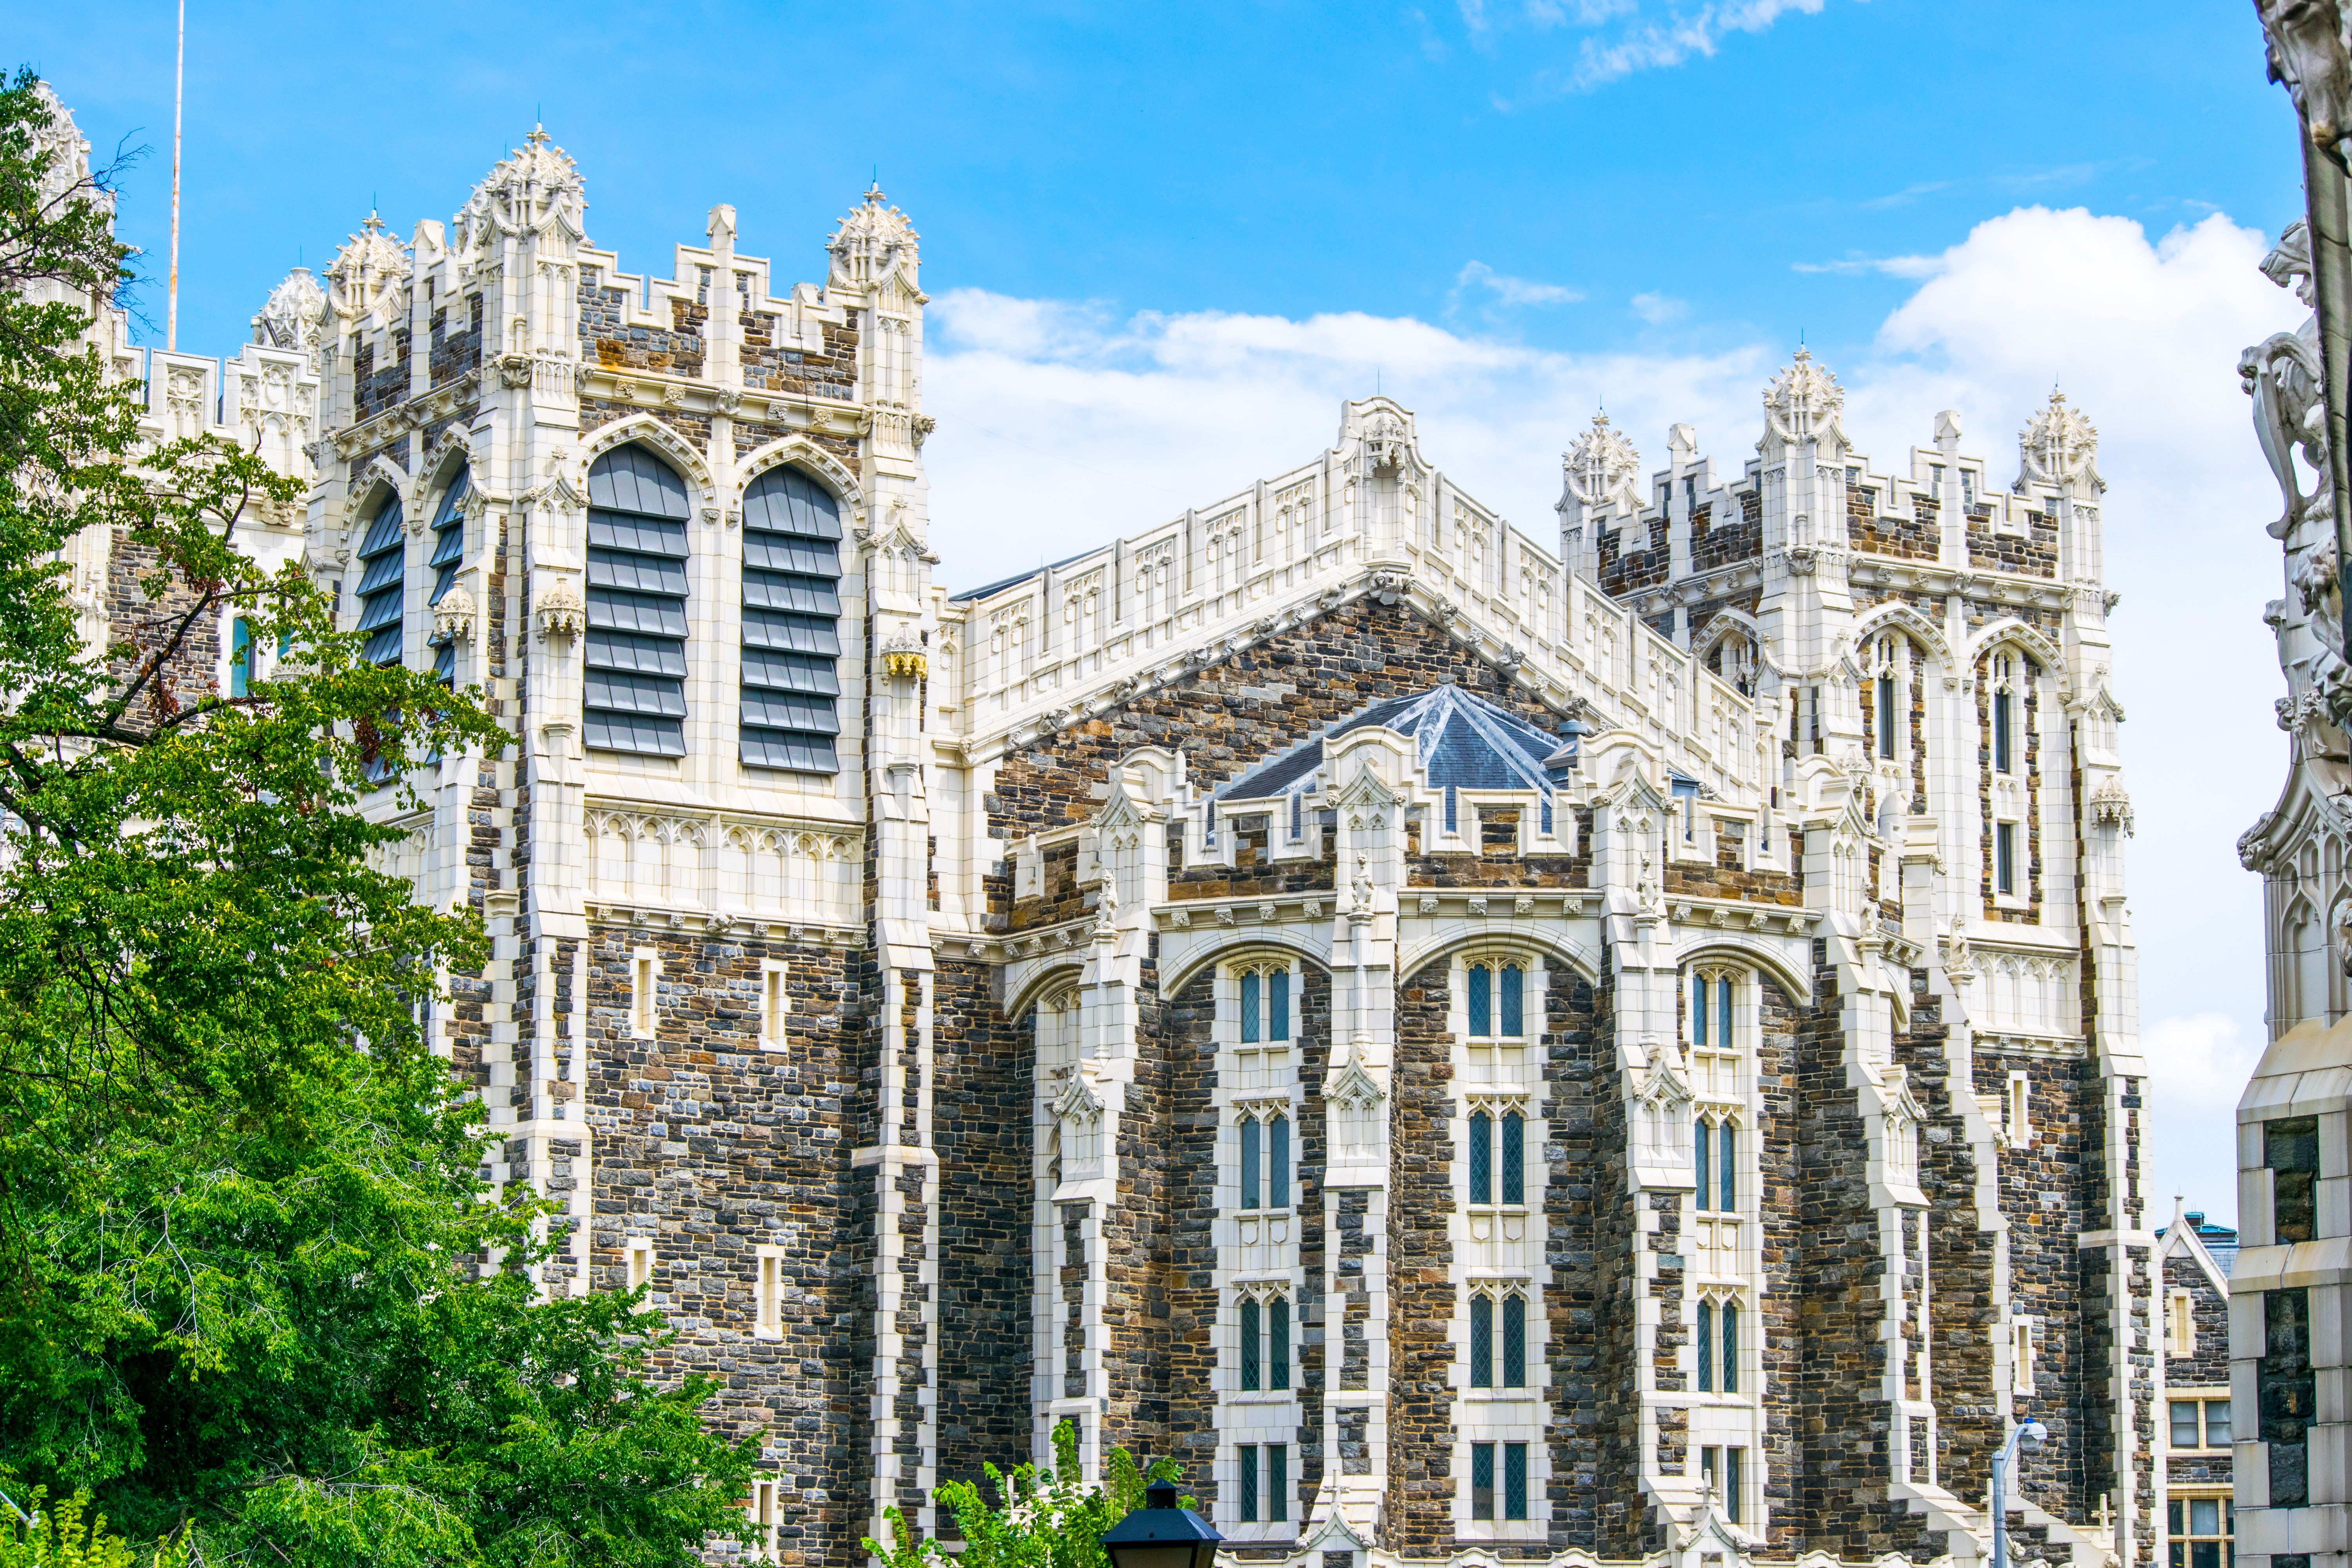 Tech giants Google & Cisco partner with CCNY in expanded professional studies program